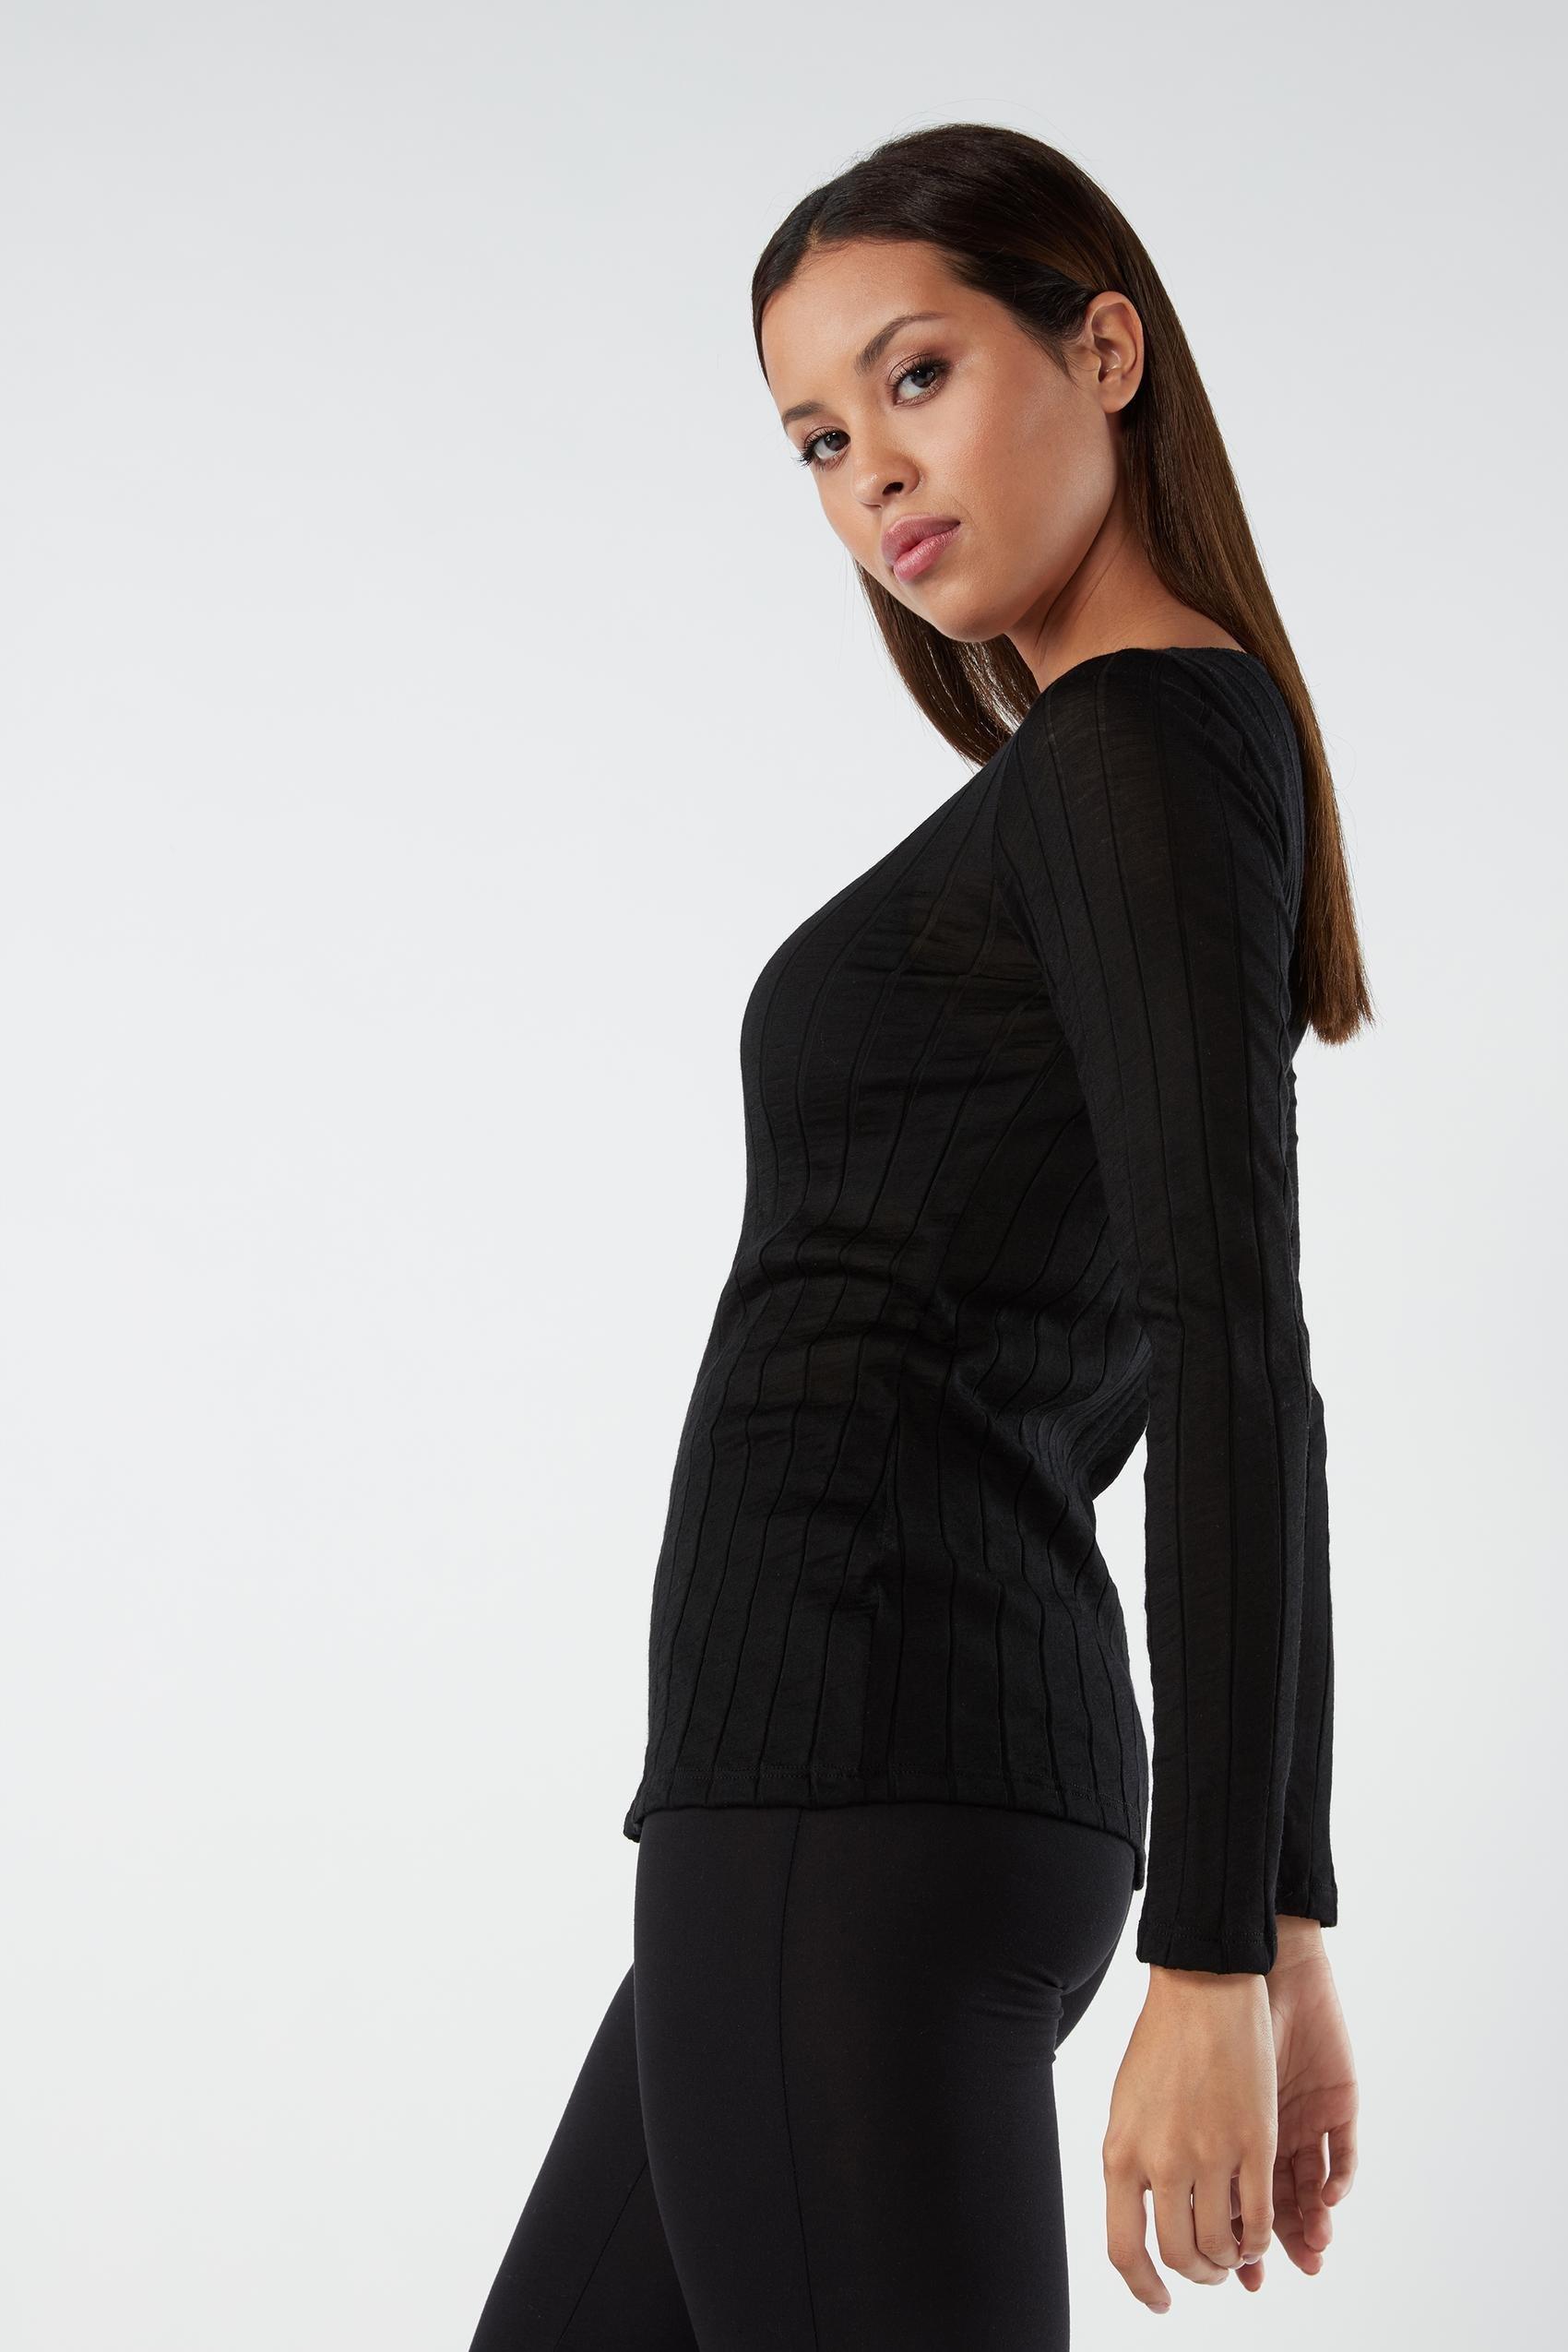 Intimissimi - Black Wool and Silk Ribbed Boat-neck Shirt